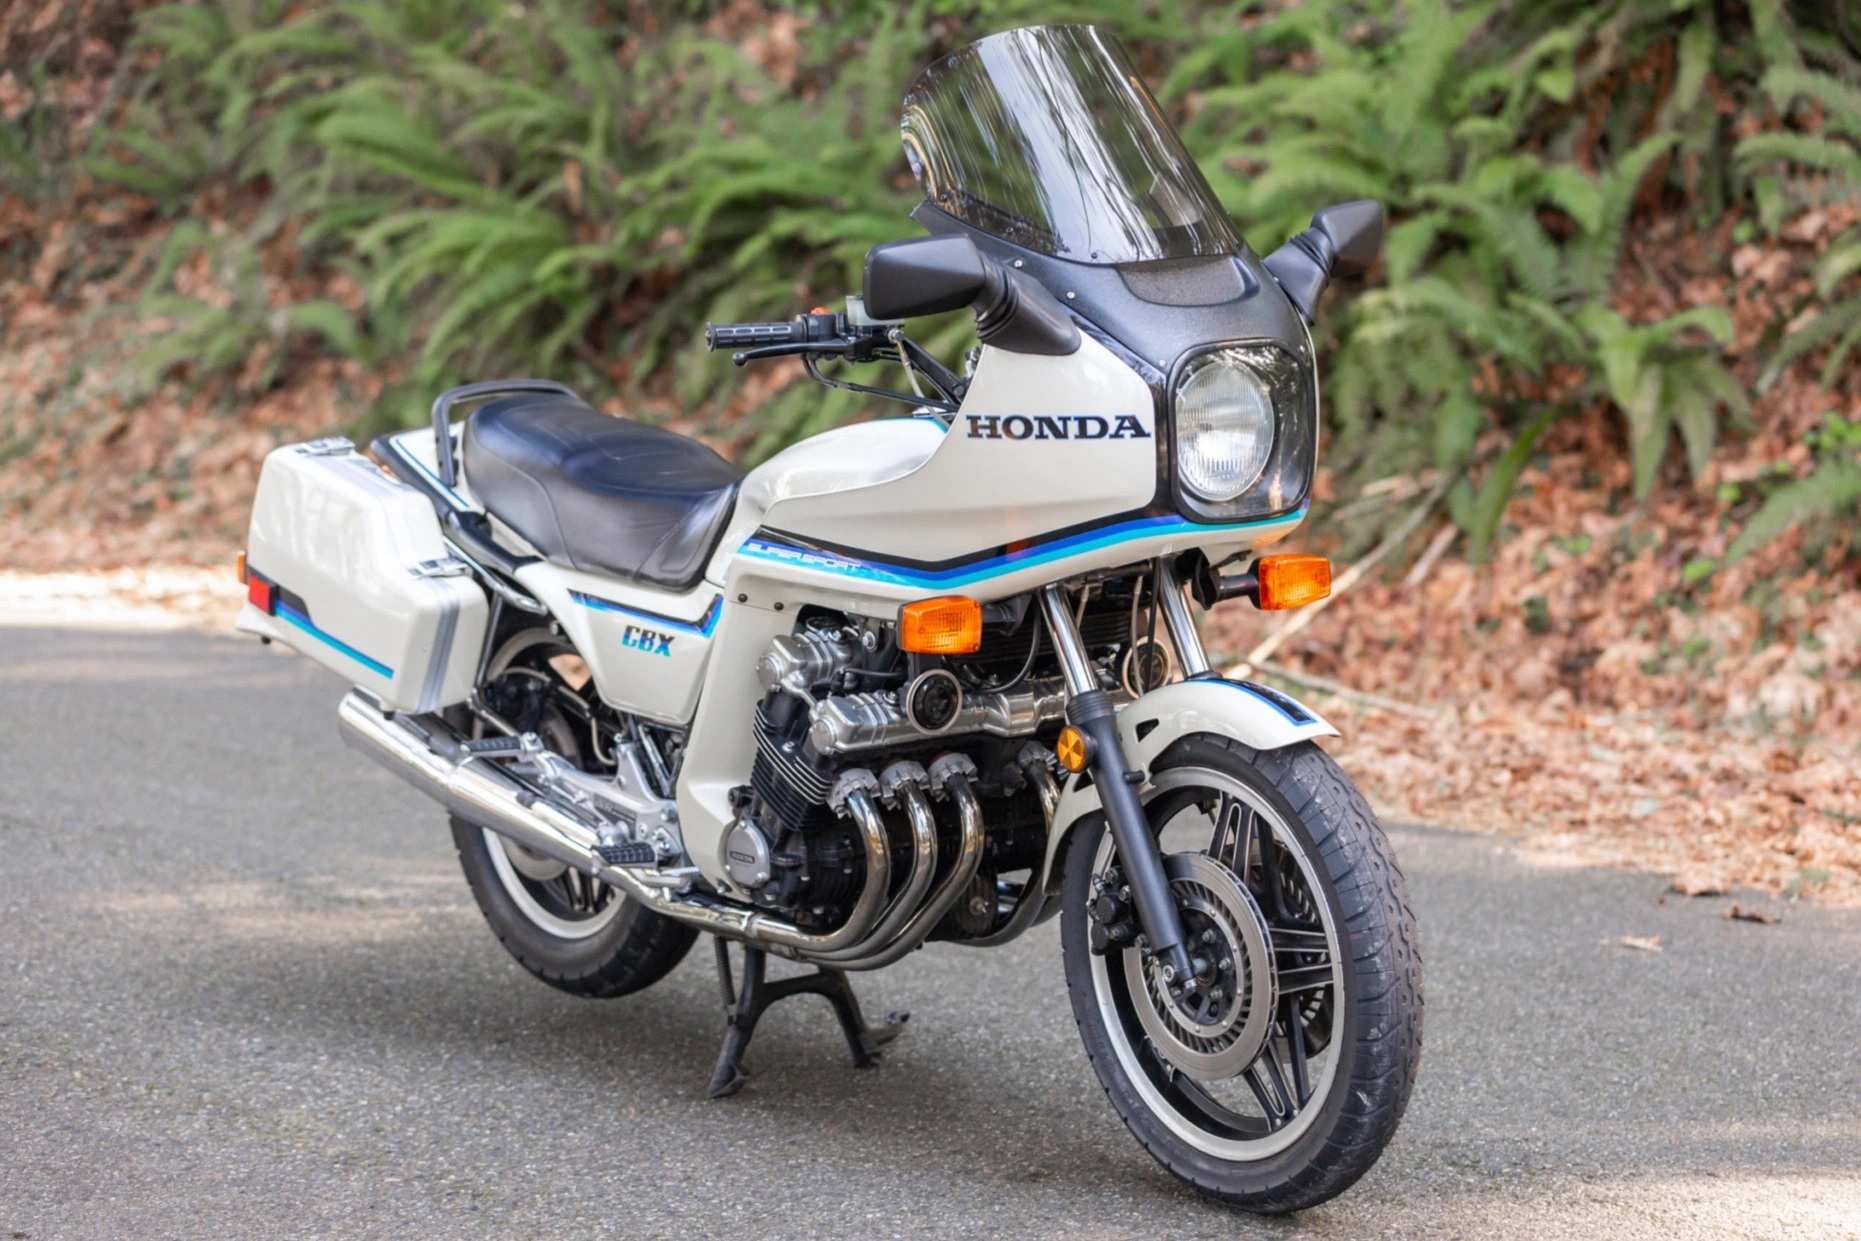 The Honda Cbx 1000 Was An 80s 6 Cylinder Superbike